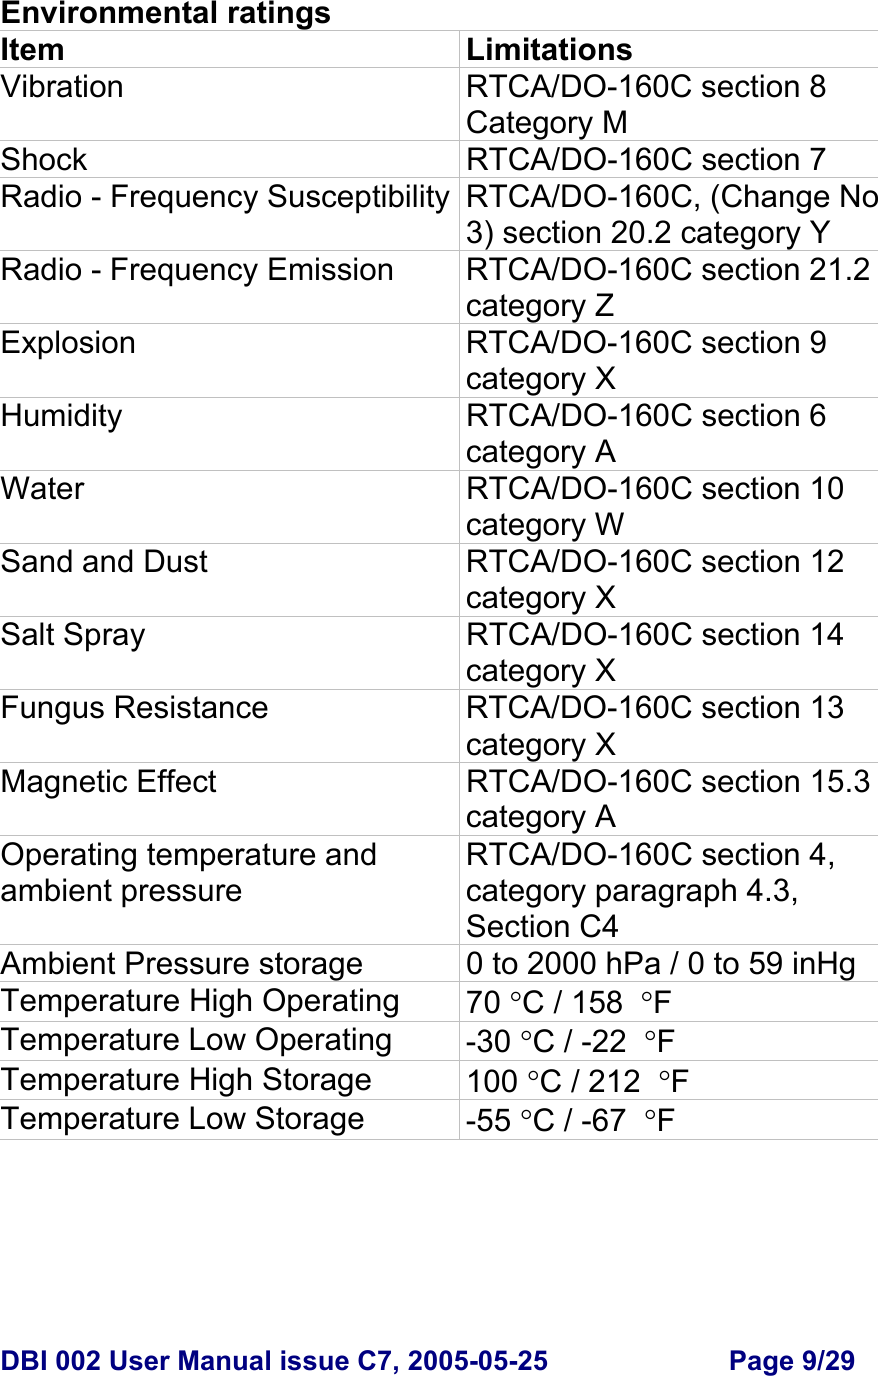  DBI 002 User Manual issue C7, 2005-05-25  Page 9/29   Environmental ratings Item Limitations Vibration RTCA/DO-160C section 8 Category M Shock RTCA/DO-160C section 7 Radio - Frequency Susceptibility RTCA/DO-160C, (Change No 3) section 20.2 category Y Radio - Frequency Emission  RTCA/DO-160C section 21.2 category Z Explosion RTCA/DO-160C section 9 category X Humidity RTCA/DO-160C section 6 category A Water RTCA/DO-160C section 10 category W Sand and Dust  RTCA/DO-160C section 12 category X Salt Spray  RTCA/DO-160C section 14 category X Fungus Resistance  RTCA/DO-160C section 13 category X Magnetic Effect  RTCA/DO-160C section 15.3 category A Operating temperature and ambient pressure RTCA/DO-160C section 4, category paragraph 4.3, Section C4 Ambient Pressure storage  0 to 2000 hPa / 0 to 59 inHg Temperature High Operating  70 °C / 158  °F Temperature Low Operating  -30 °C / -22  °F Temperature High Storage  100 °C / 212  °F Temperature Low Storage  -55 °C / -67  °F  